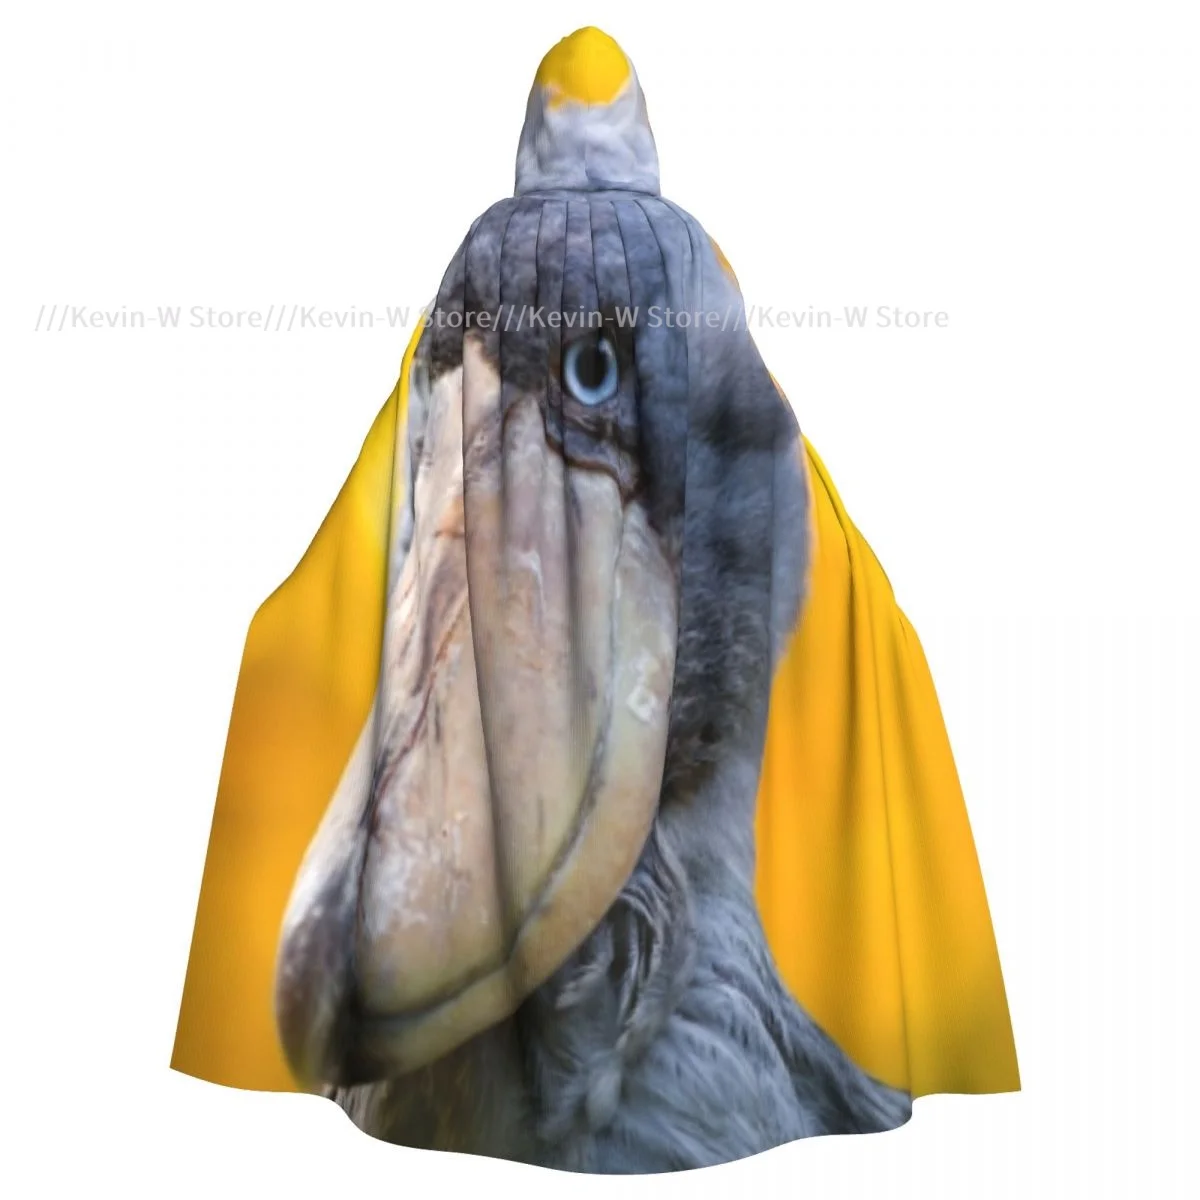 

Shoebill Head Hooded Cloak Polyester Unisex Witch Cape Costume Accessory